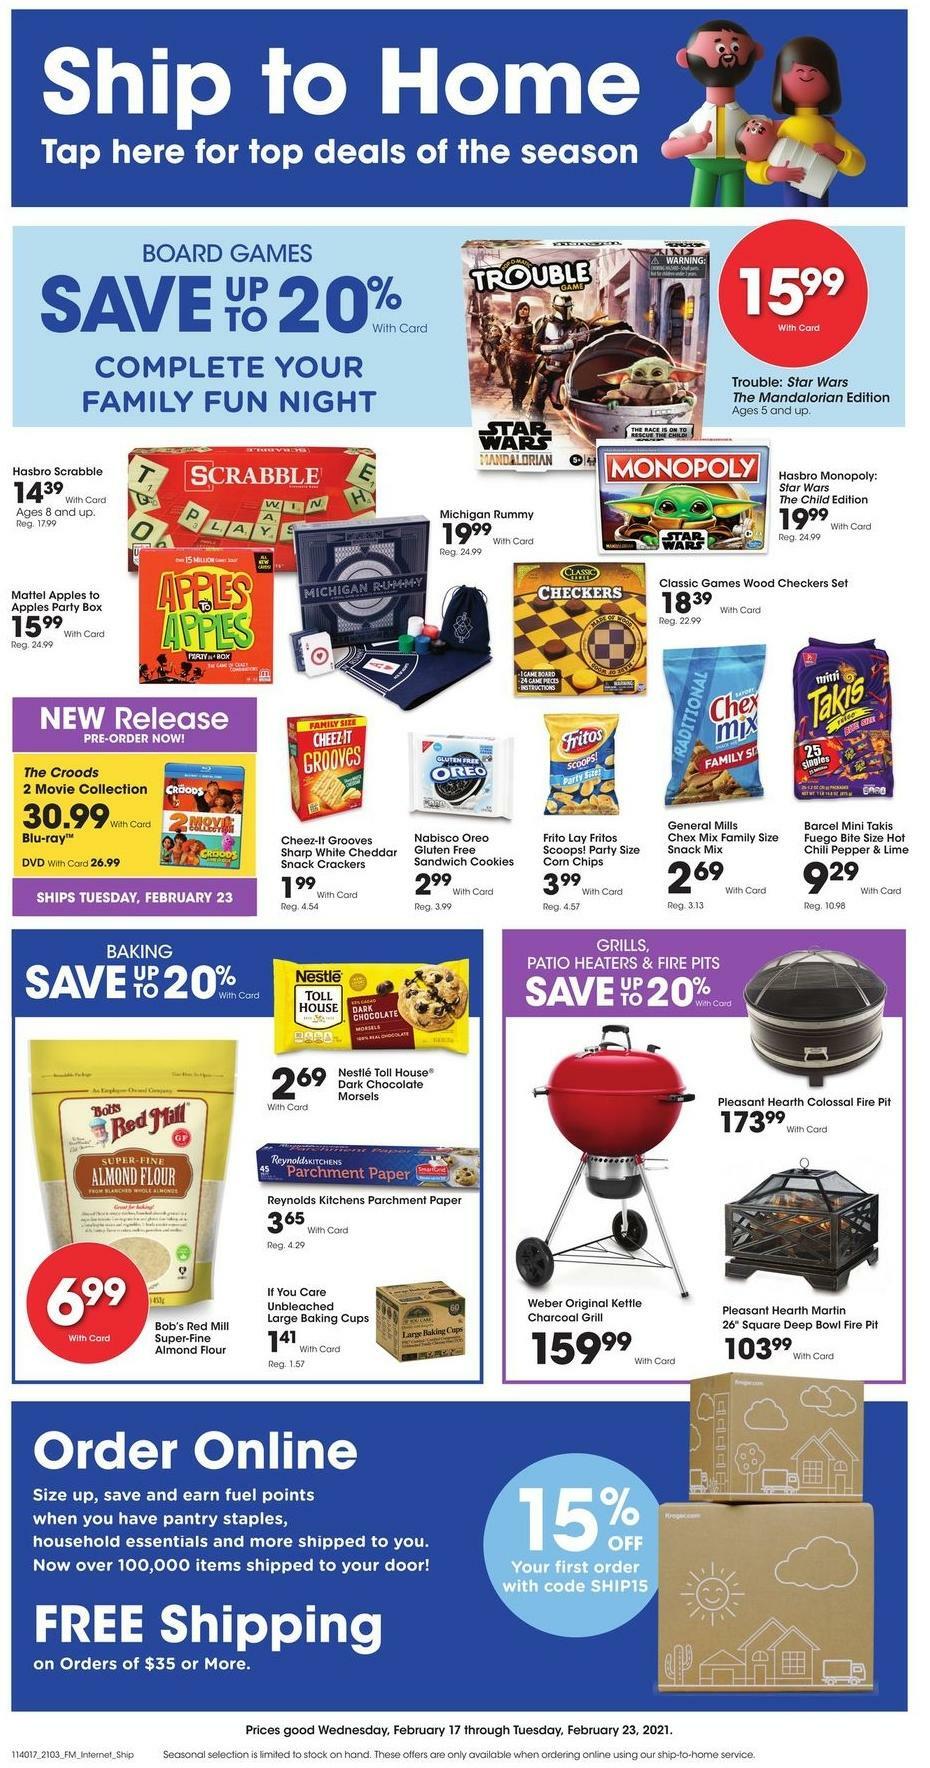 City Market Ship to Home Weekly Ad from February 17